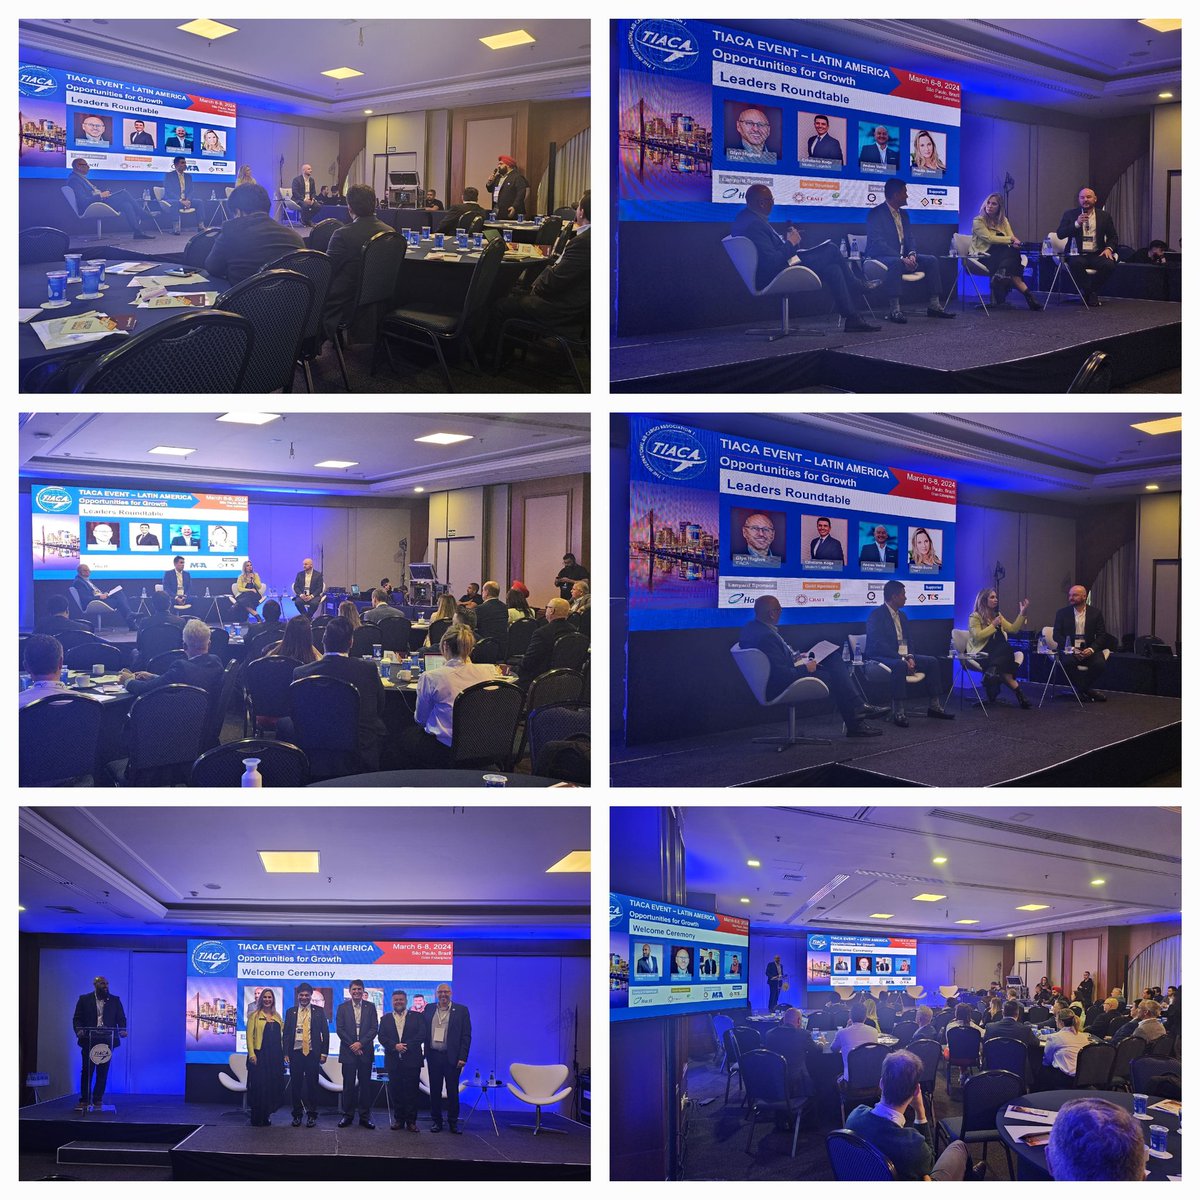 Industry Leaders Roundtable kicks off the first #TIACAEventLatinAmerica with great discussions on digitalization, the human touch, innovation, and how to grow capacity in the region.